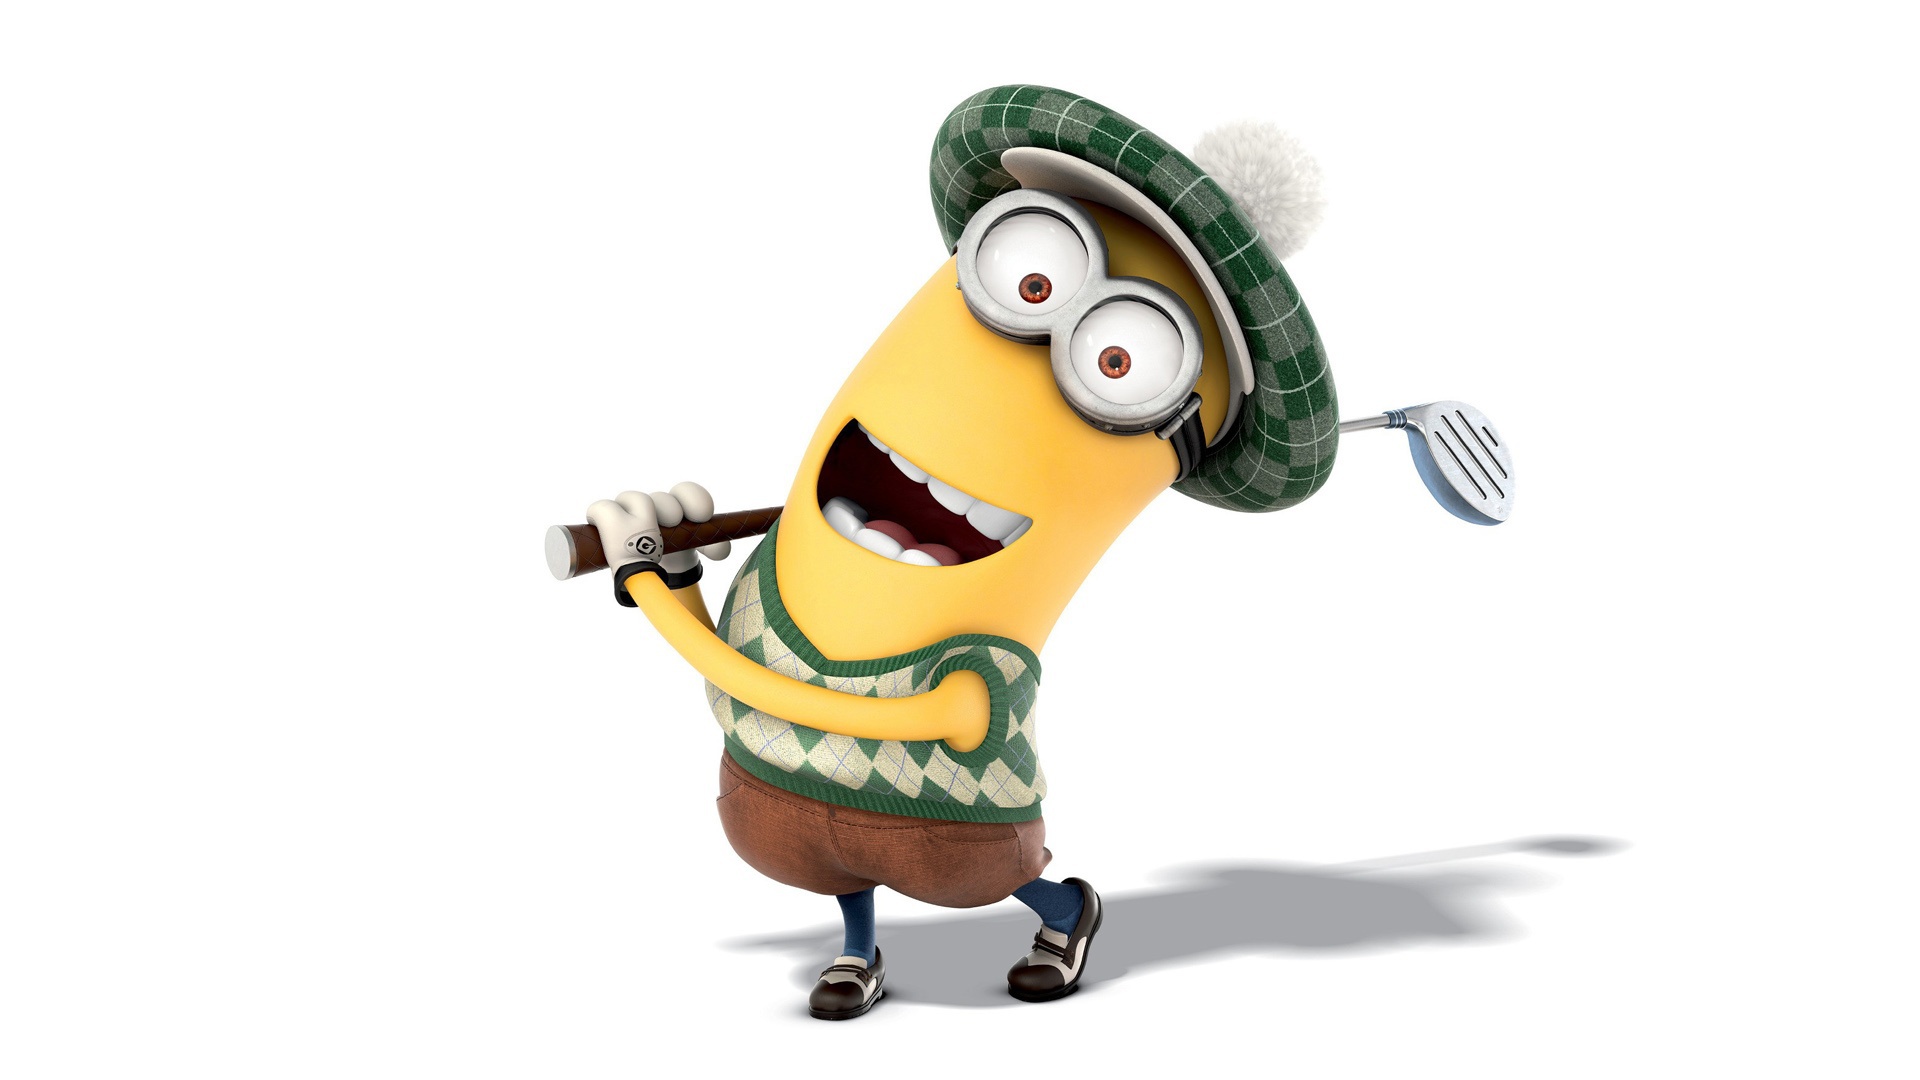 Minions Golfer wallpapers and images - wallpapers, pictures, photos